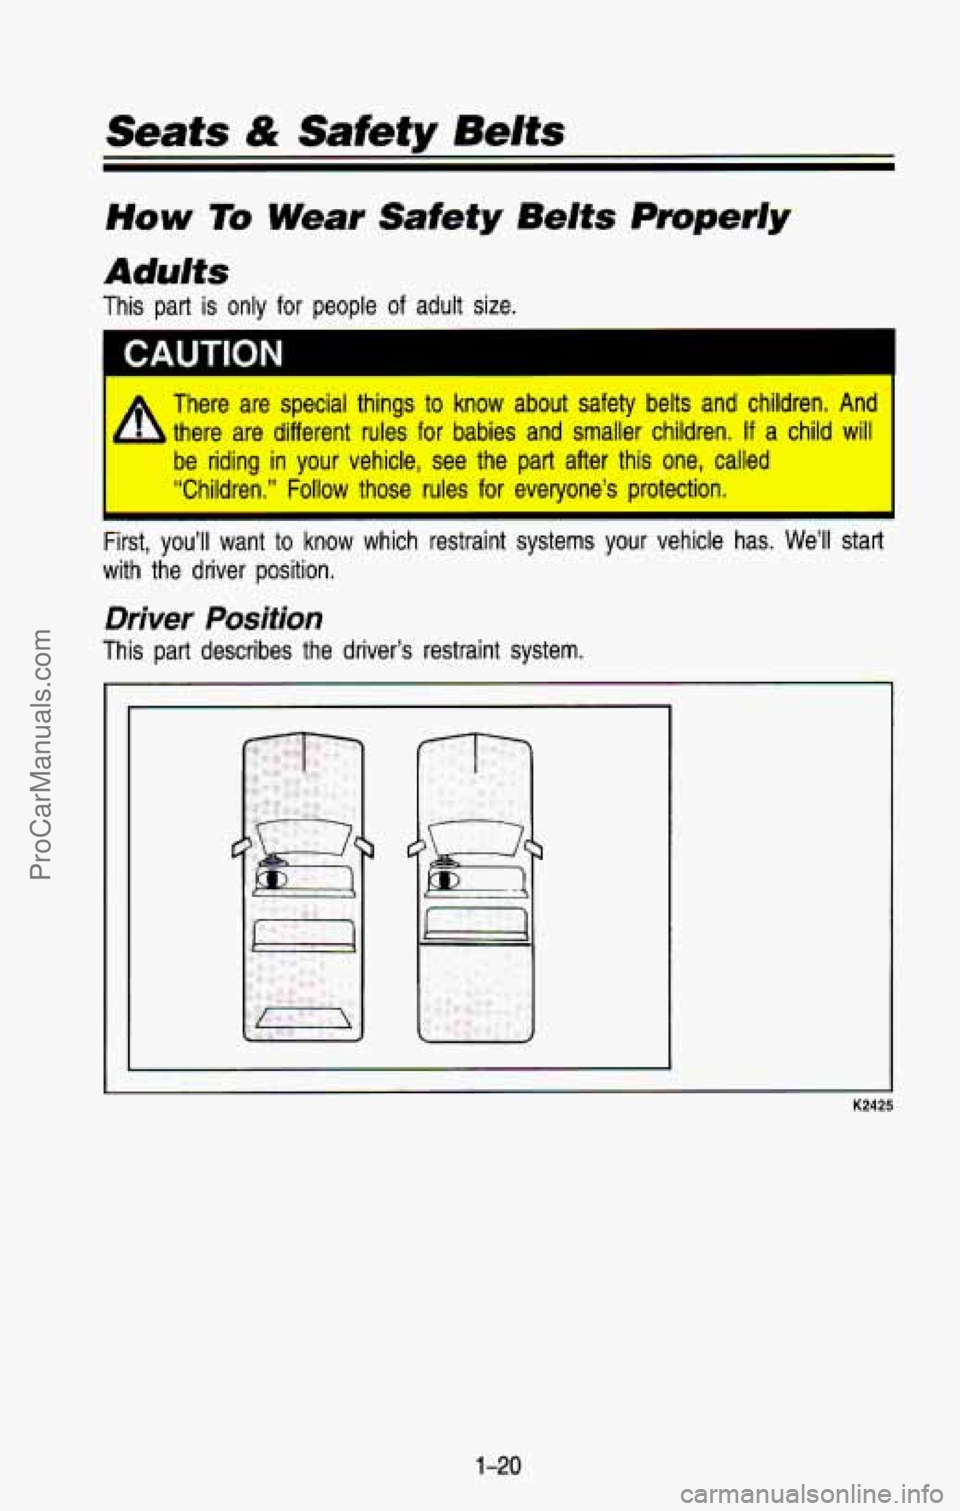 CHEVROLET SUBURBAN 1993  Owners Manual Seafs & Safety Belts 
How To Wear Safety Belts Properly 
Adults 
This  part  is  only  for  people  of  adult  size. 
+ There  are  special  things to know  about  safety  belts  and  children.  And 
